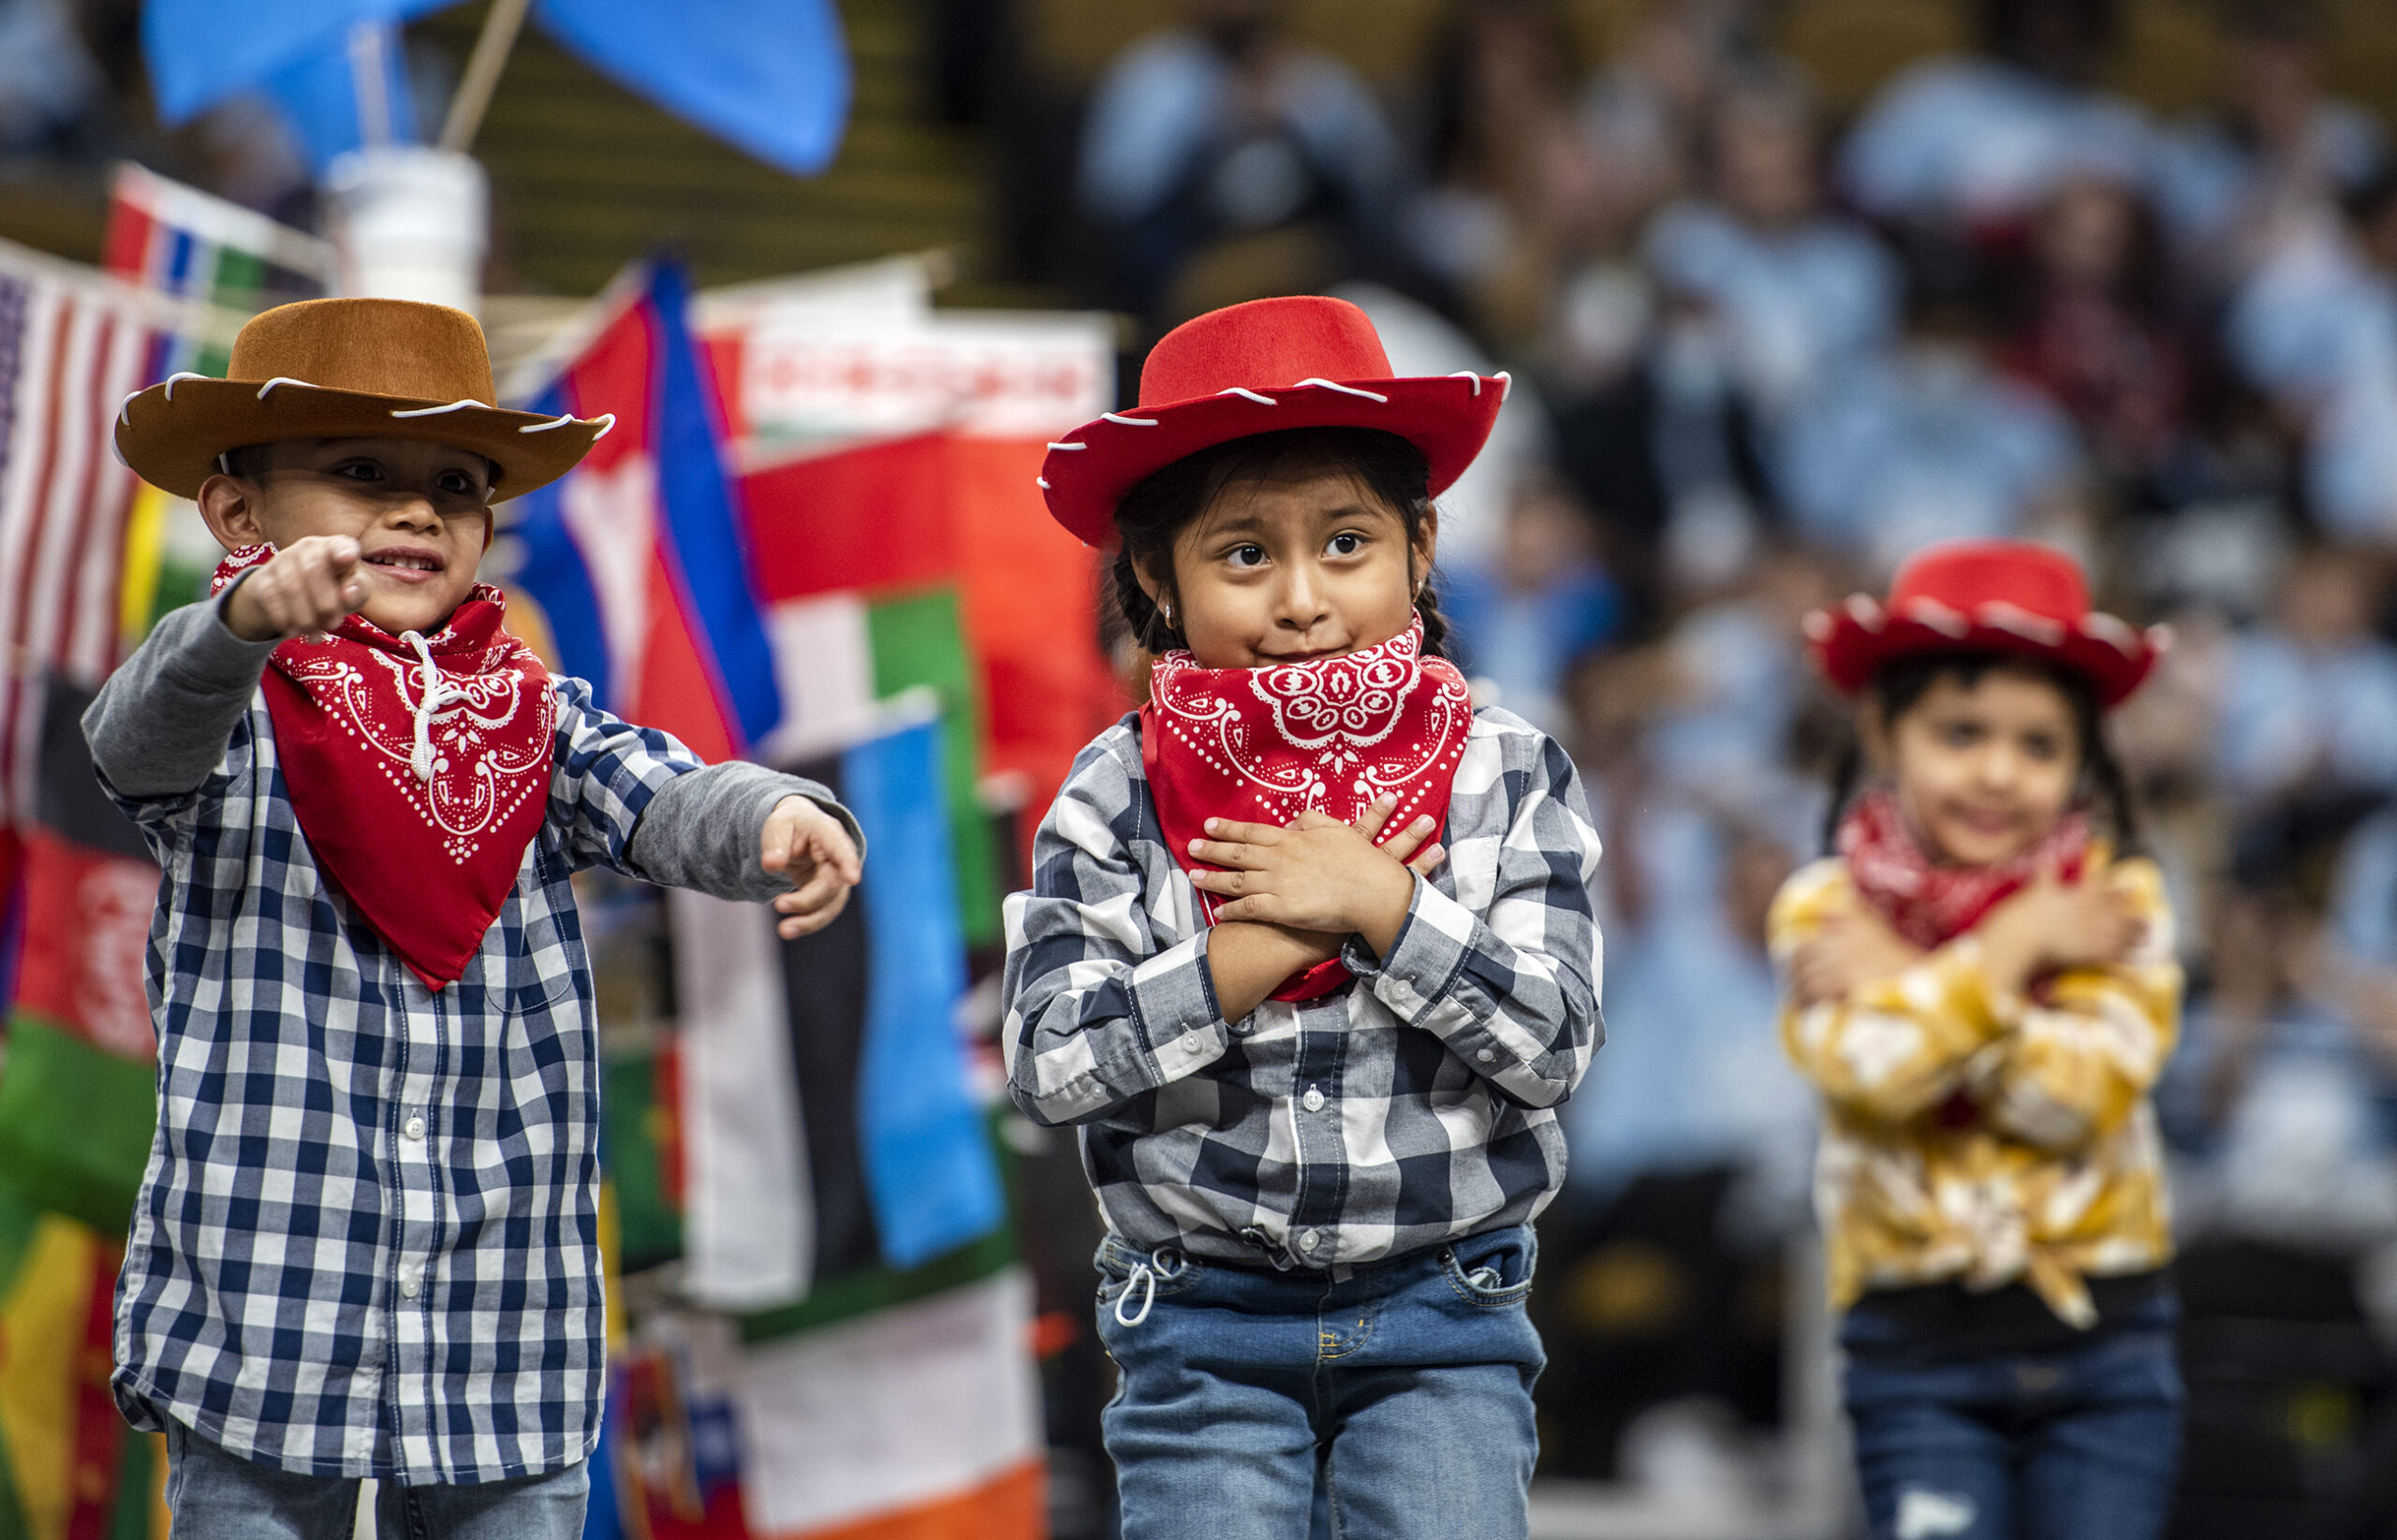 Three students in cowboy hats perform a dance on stage.